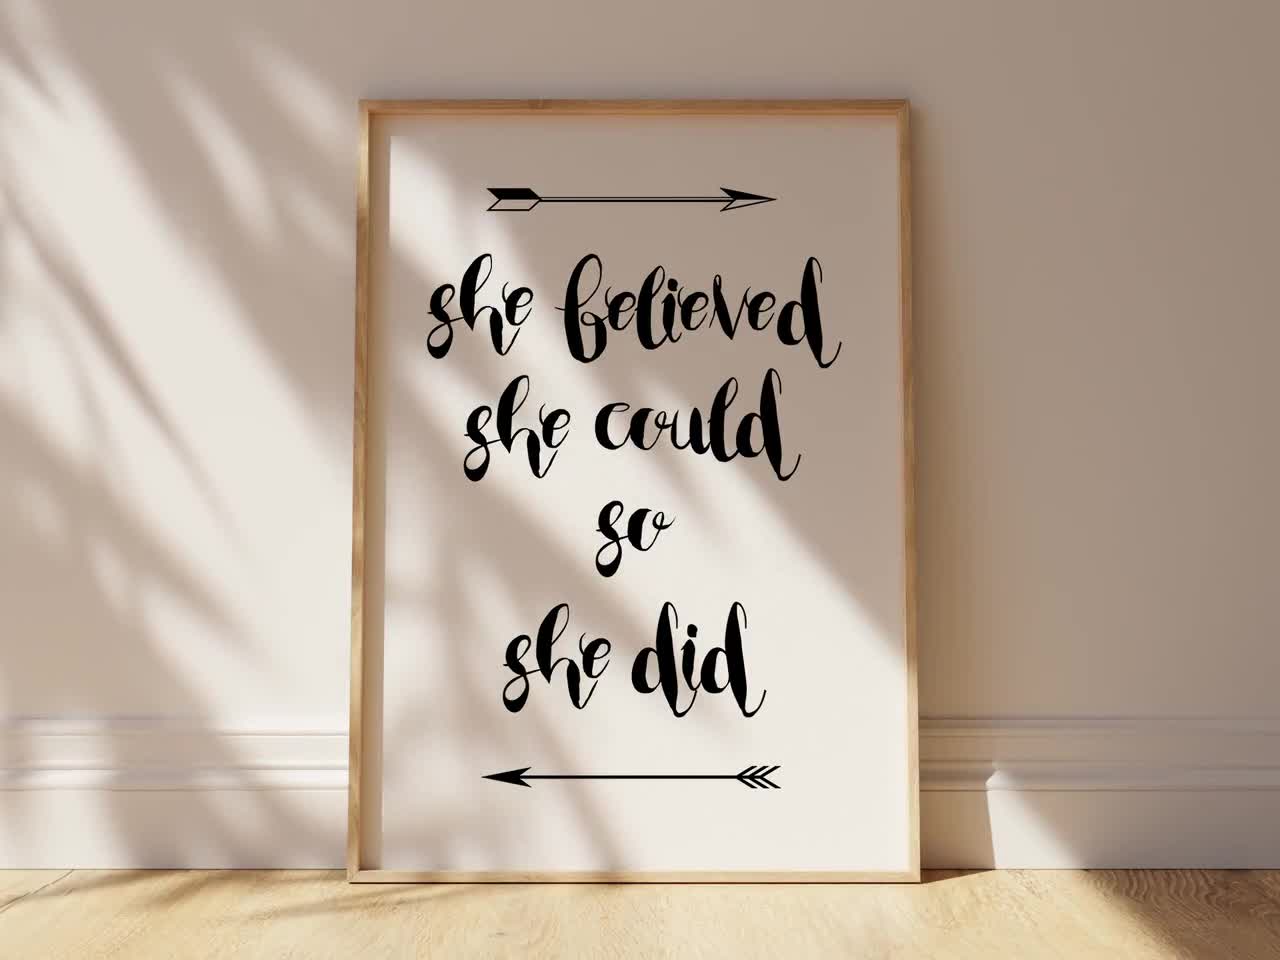 Teen Girl Room Did Girls Art Picture, so Poster, Feminist Quotes, Decor, She Quote Believed - Pictures, Monochrome Could It Wall Etsy She She Gift